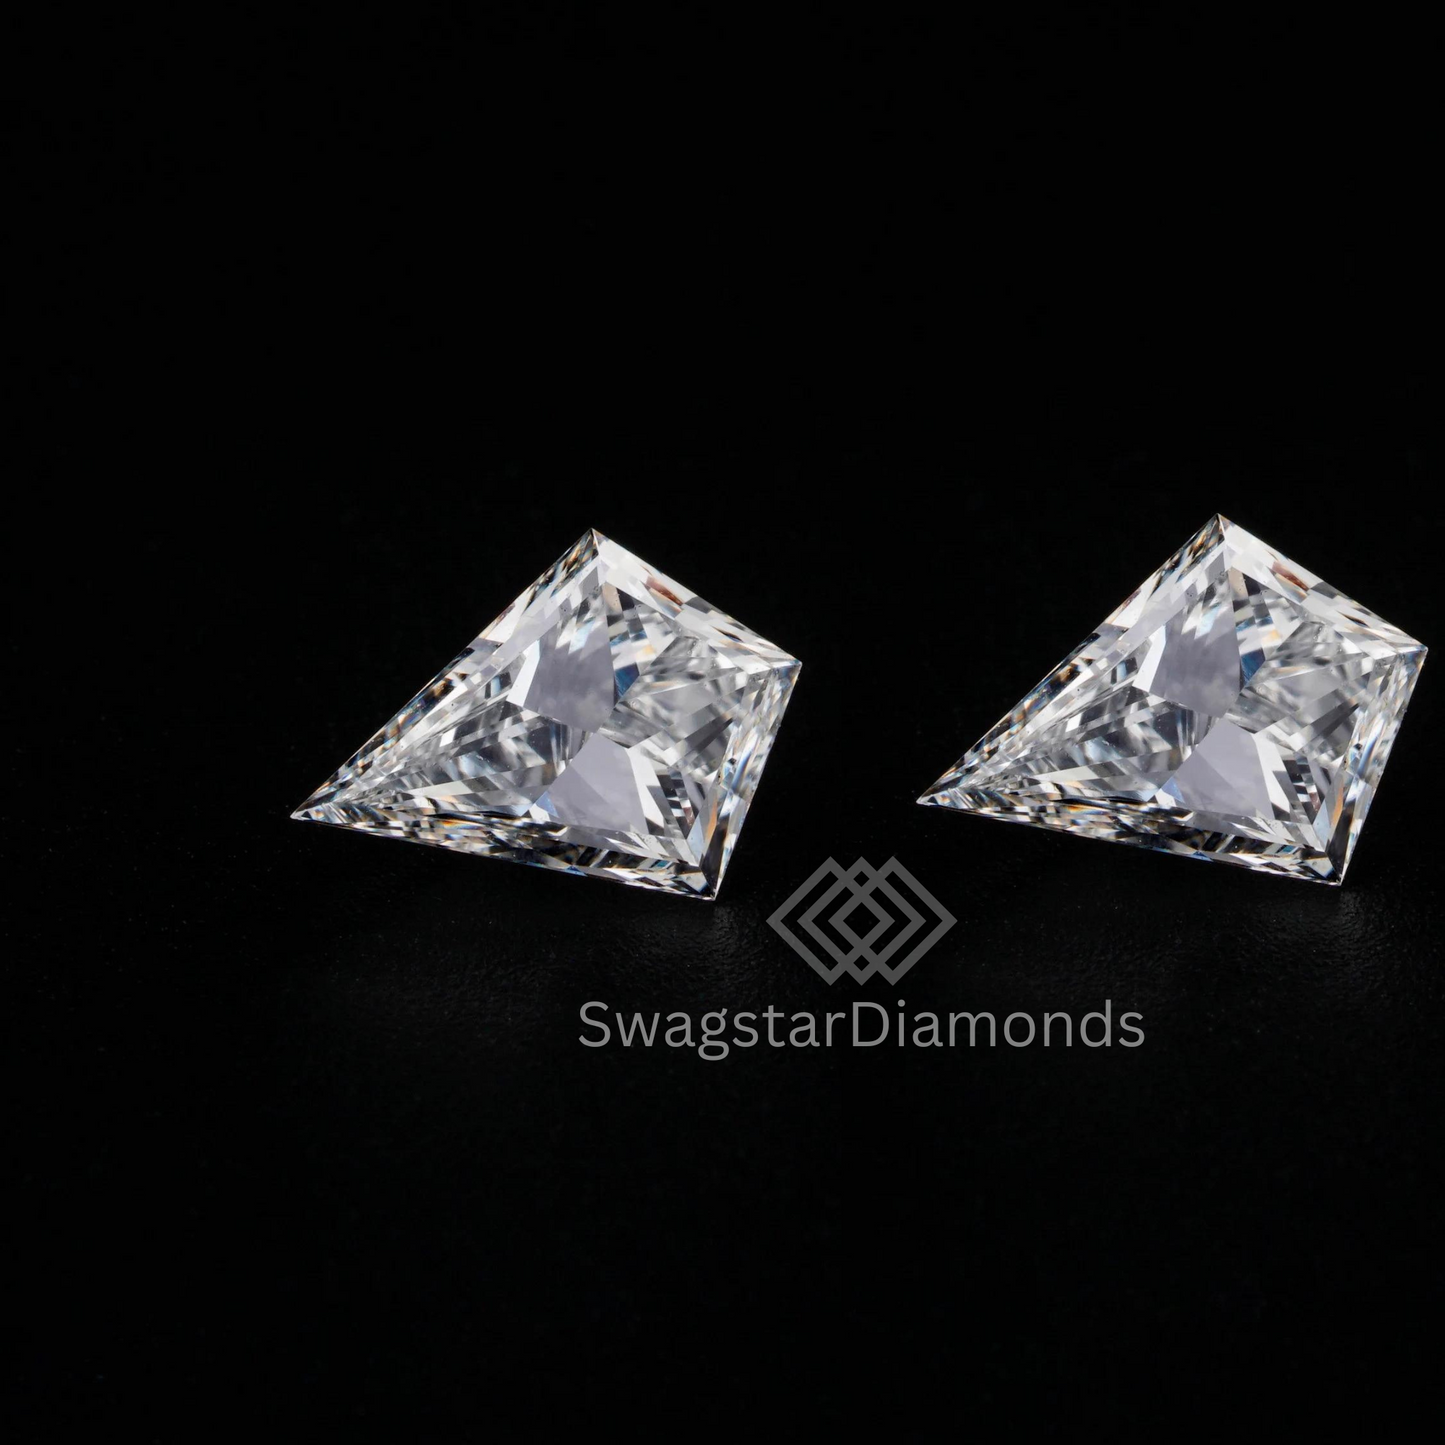 Kite Shape Diamonds With Lab-Grown & Natural Diamonds, Jewelry By Leading Manufacturer From Swagstar, Surat. Explore Wedding, Engagement, Eternity Rings, Earring & Studs, Bracelets In 10k, 14k, & 18k Gold Varieties, Including White, Yellow, Rose Gold.